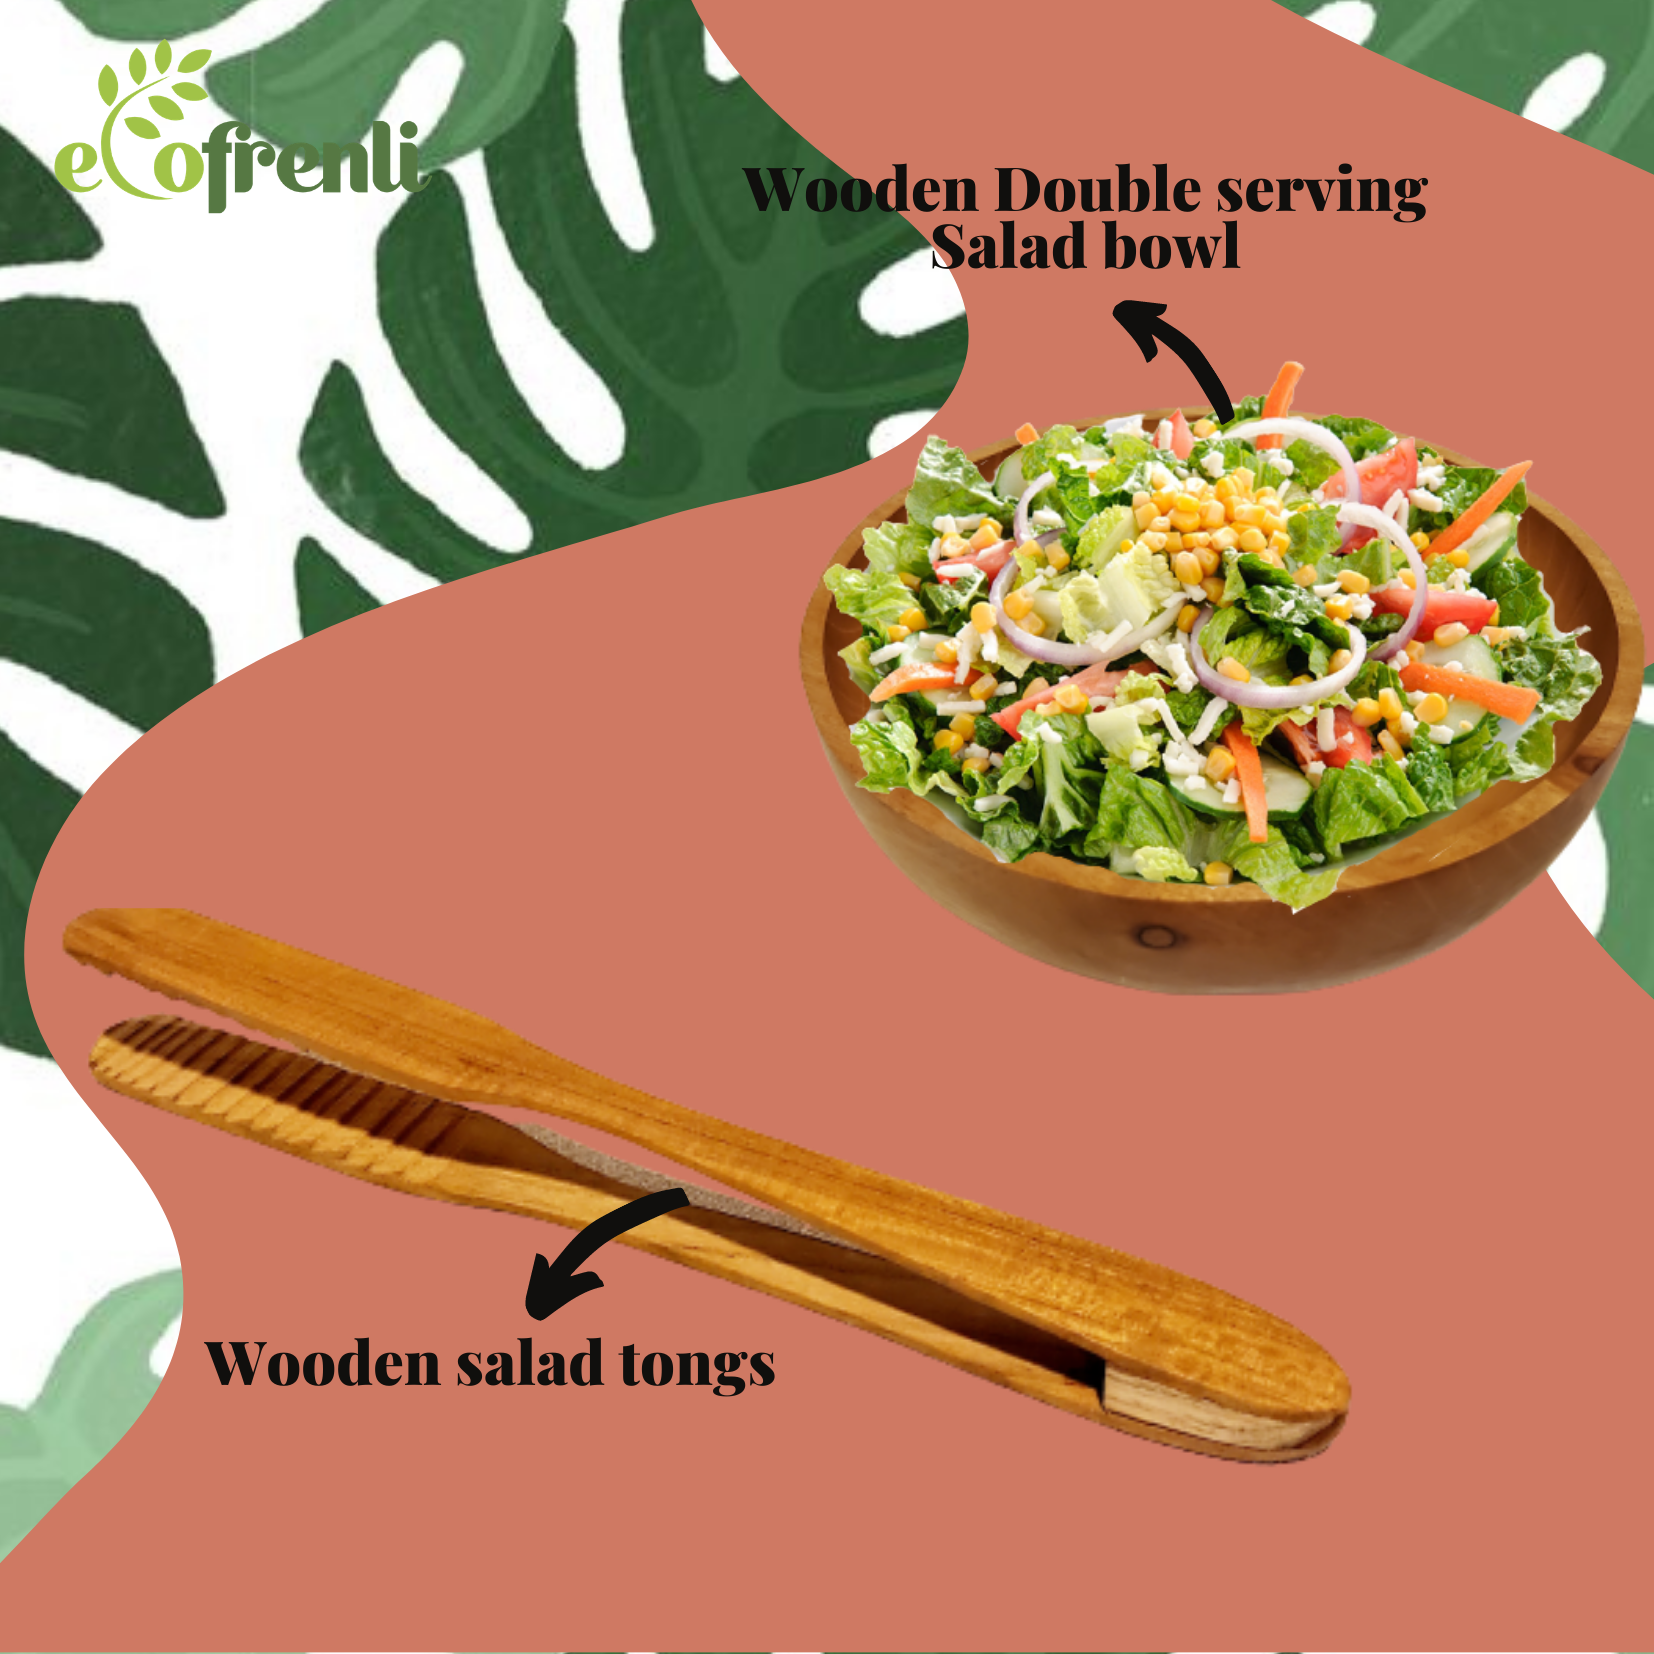 Wooden Salad Bowl with Tongs - Ecofrenli.com